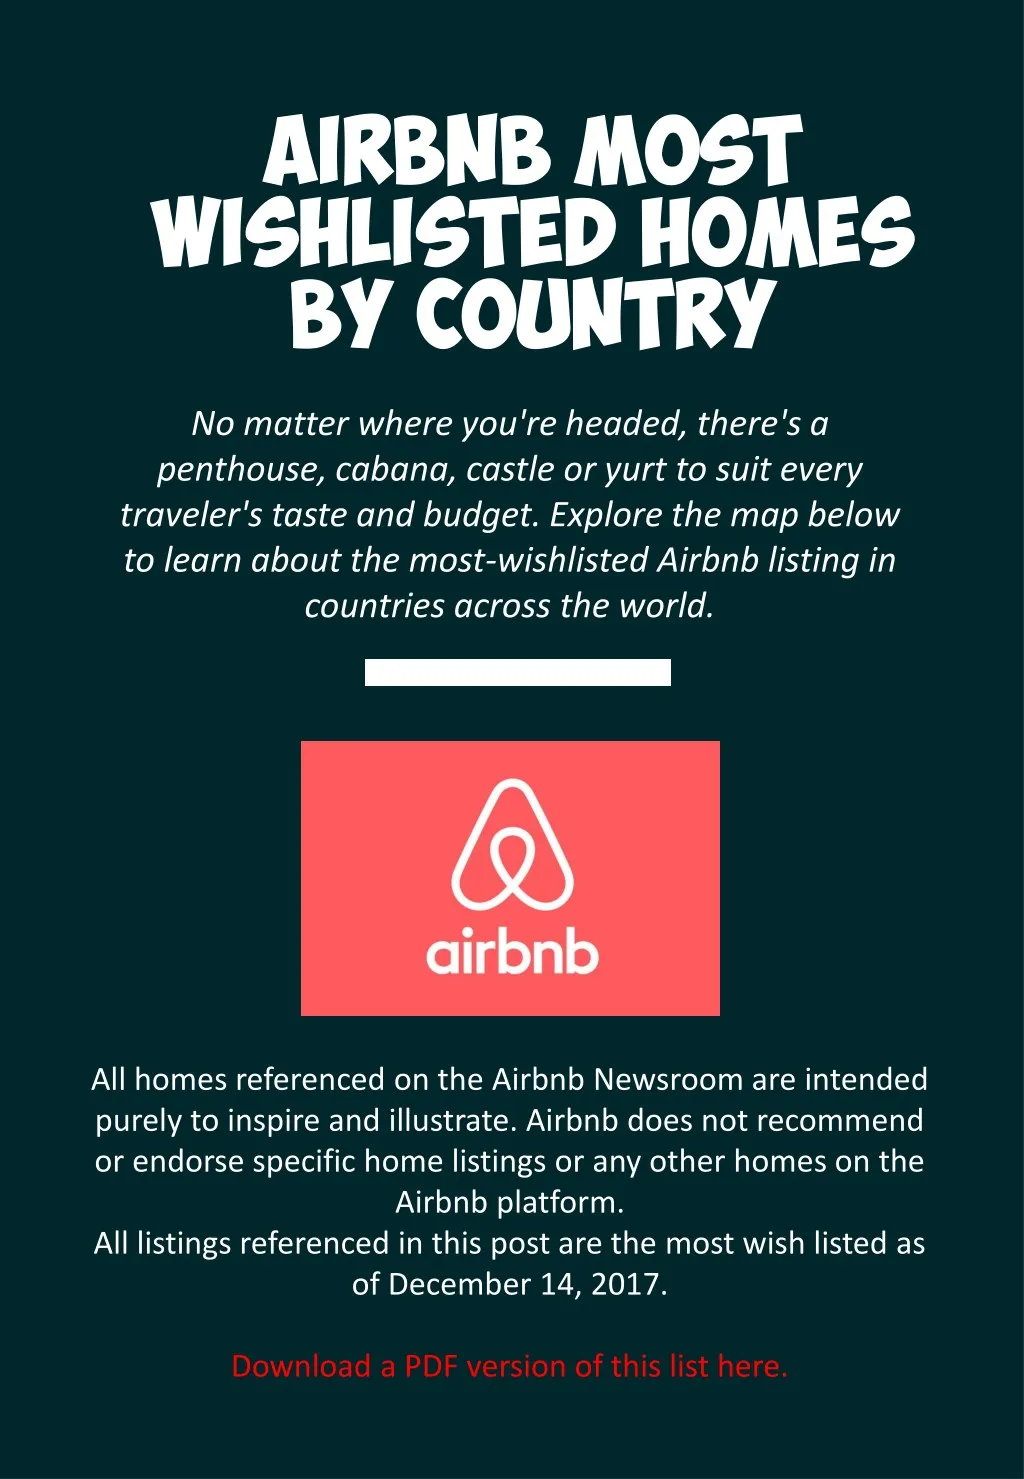 airbnb most wishlisted homes by country